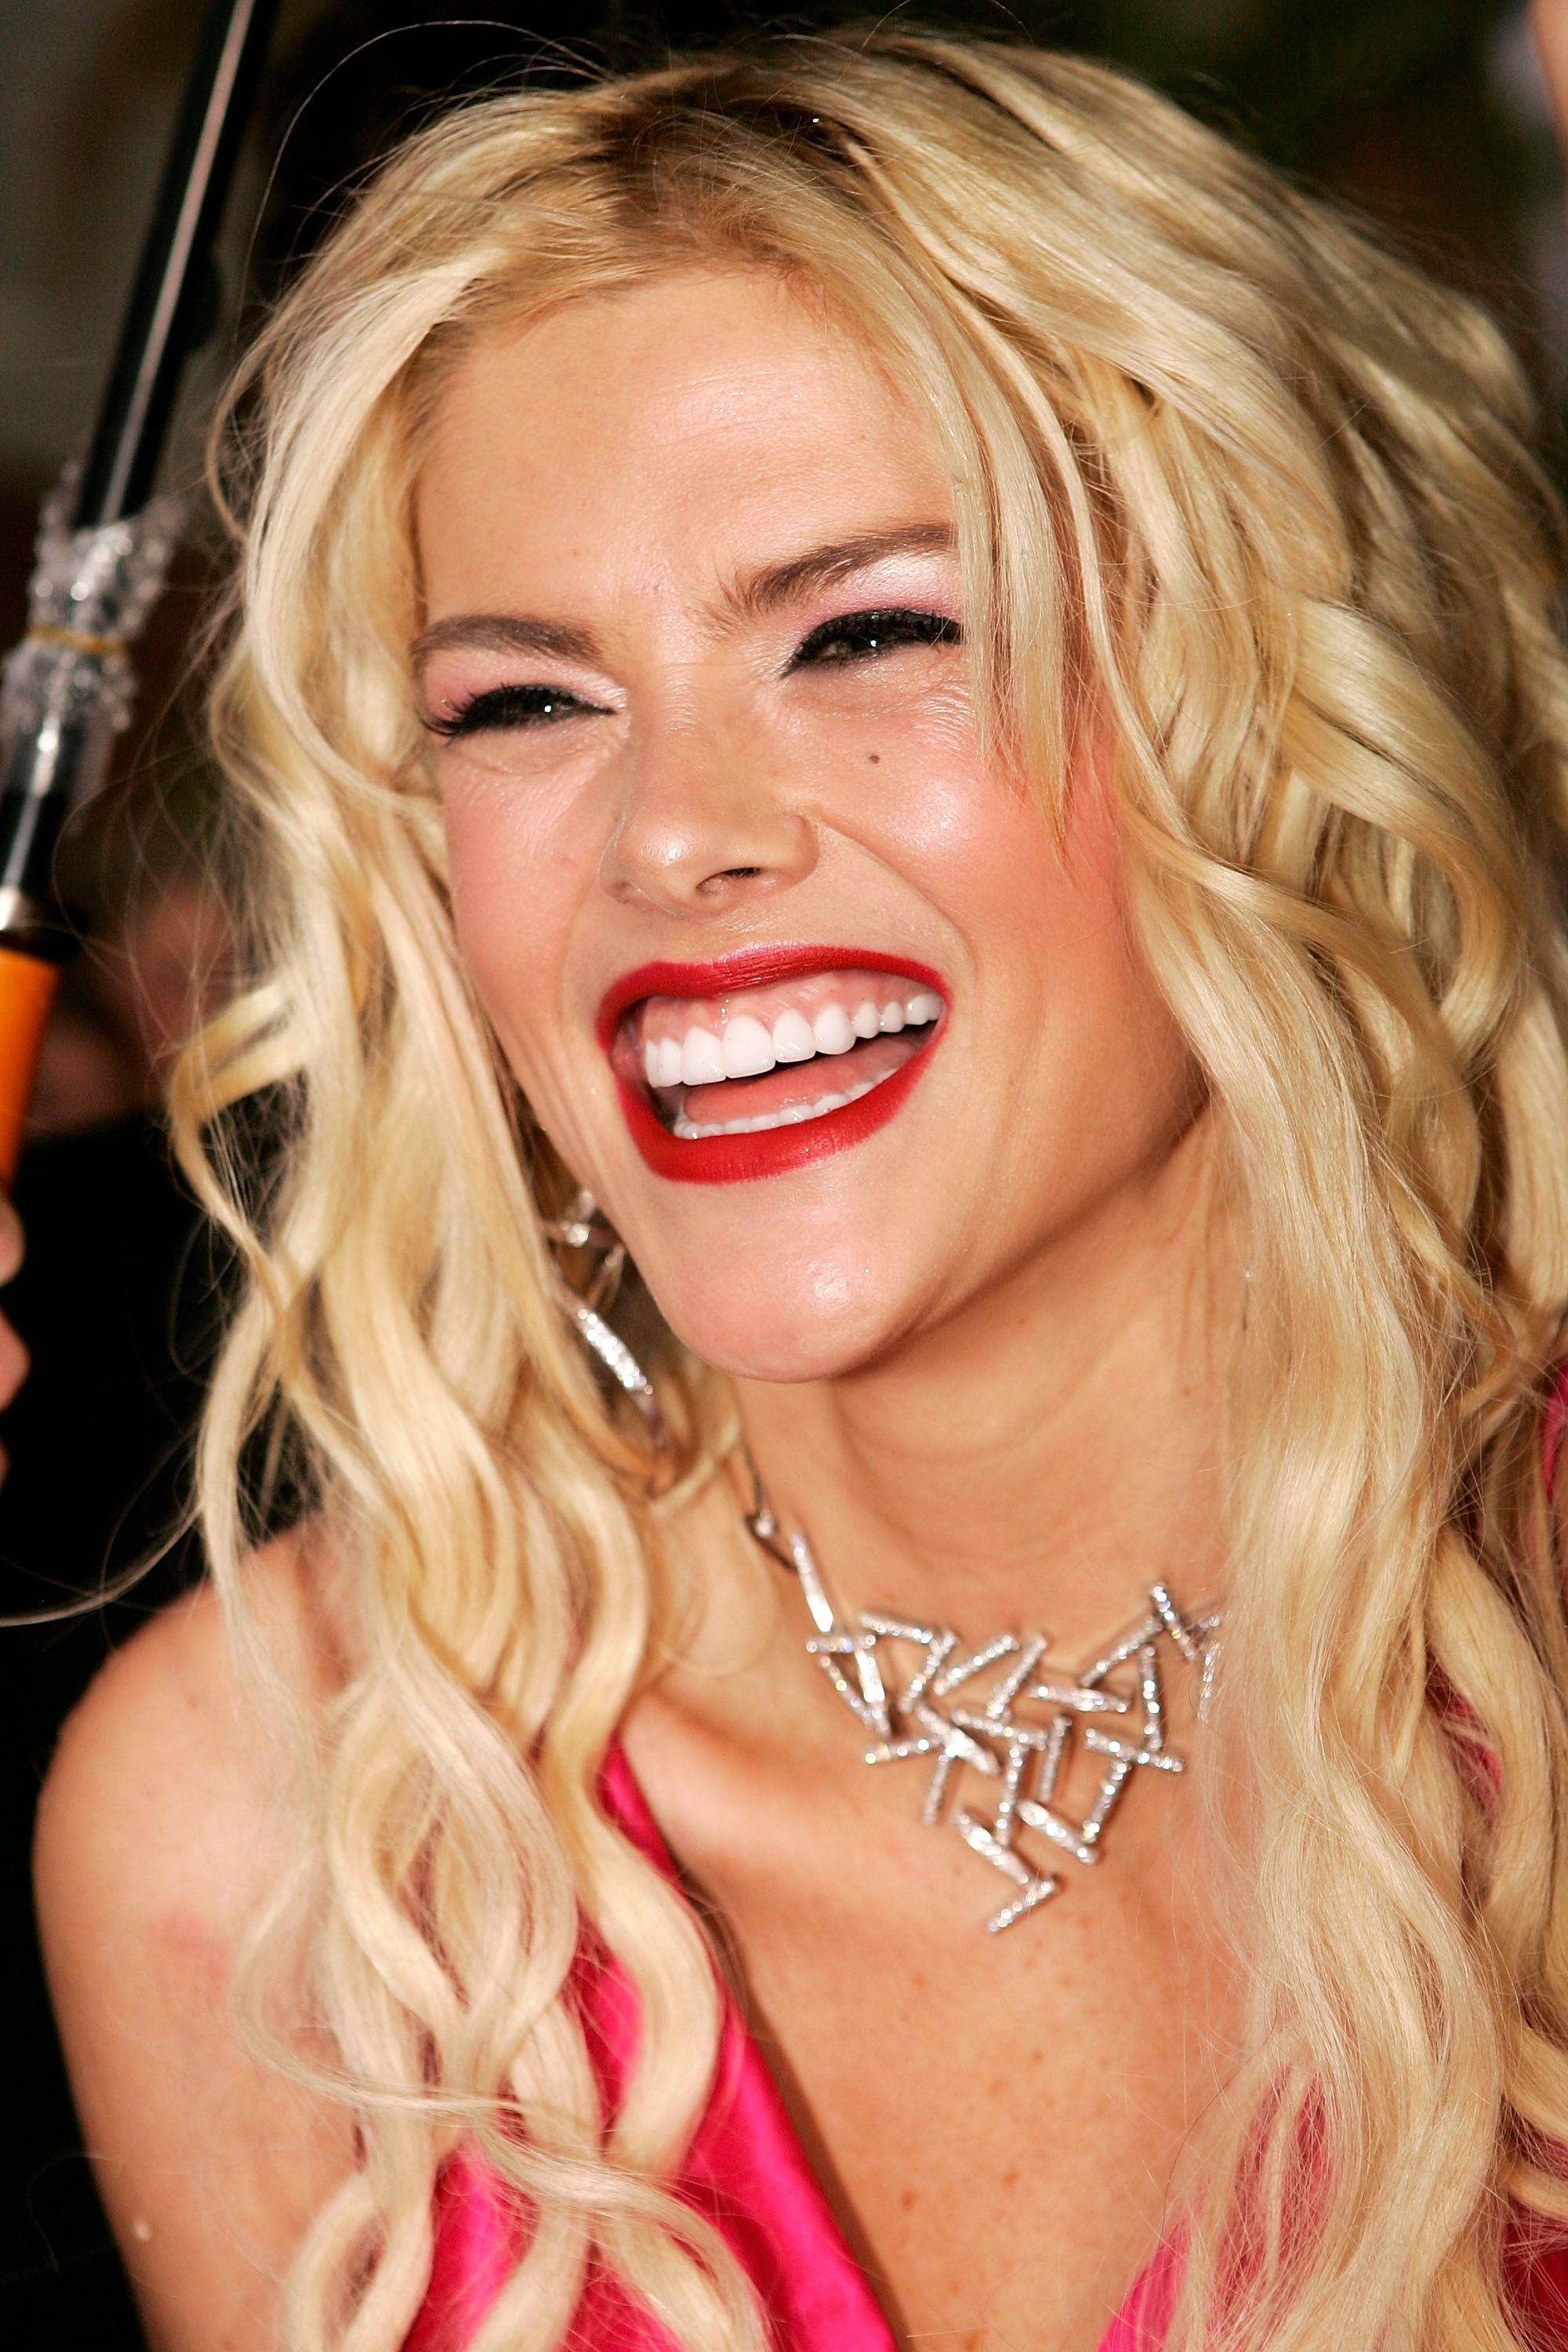 Anna Nicole Smith at the inaugural MTV Australia Video Music Awards in 2005 in Sydney, Australia | Source: Getty Images